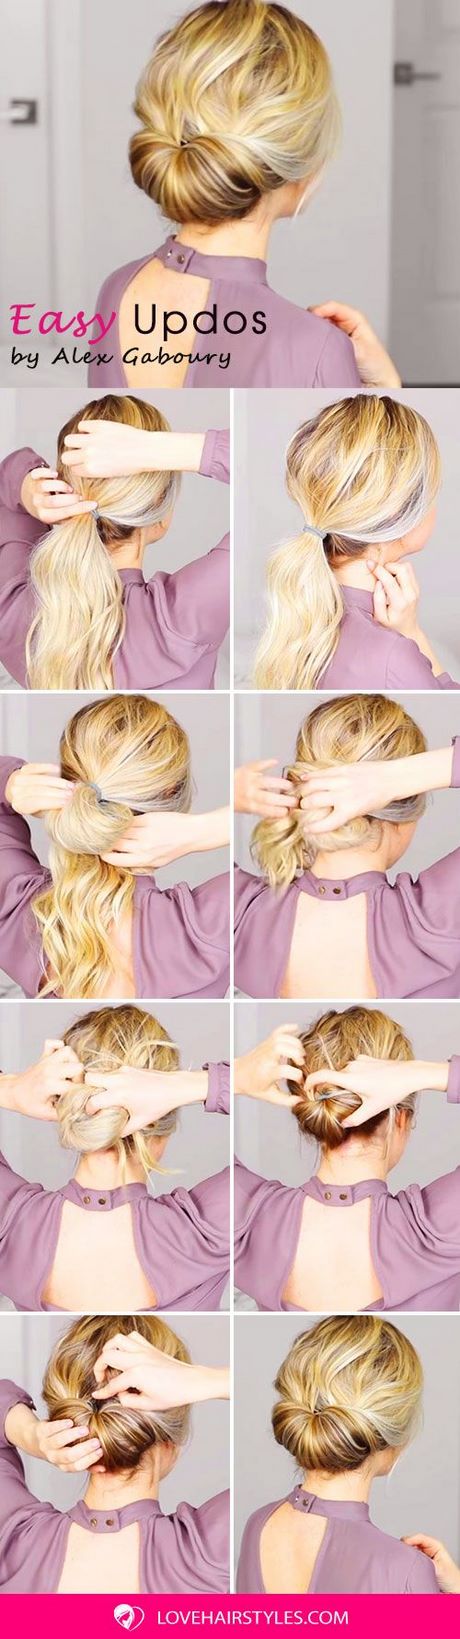 Quick and easy updo hairstyles quick-and-easy-updo-hairstyles-12_9